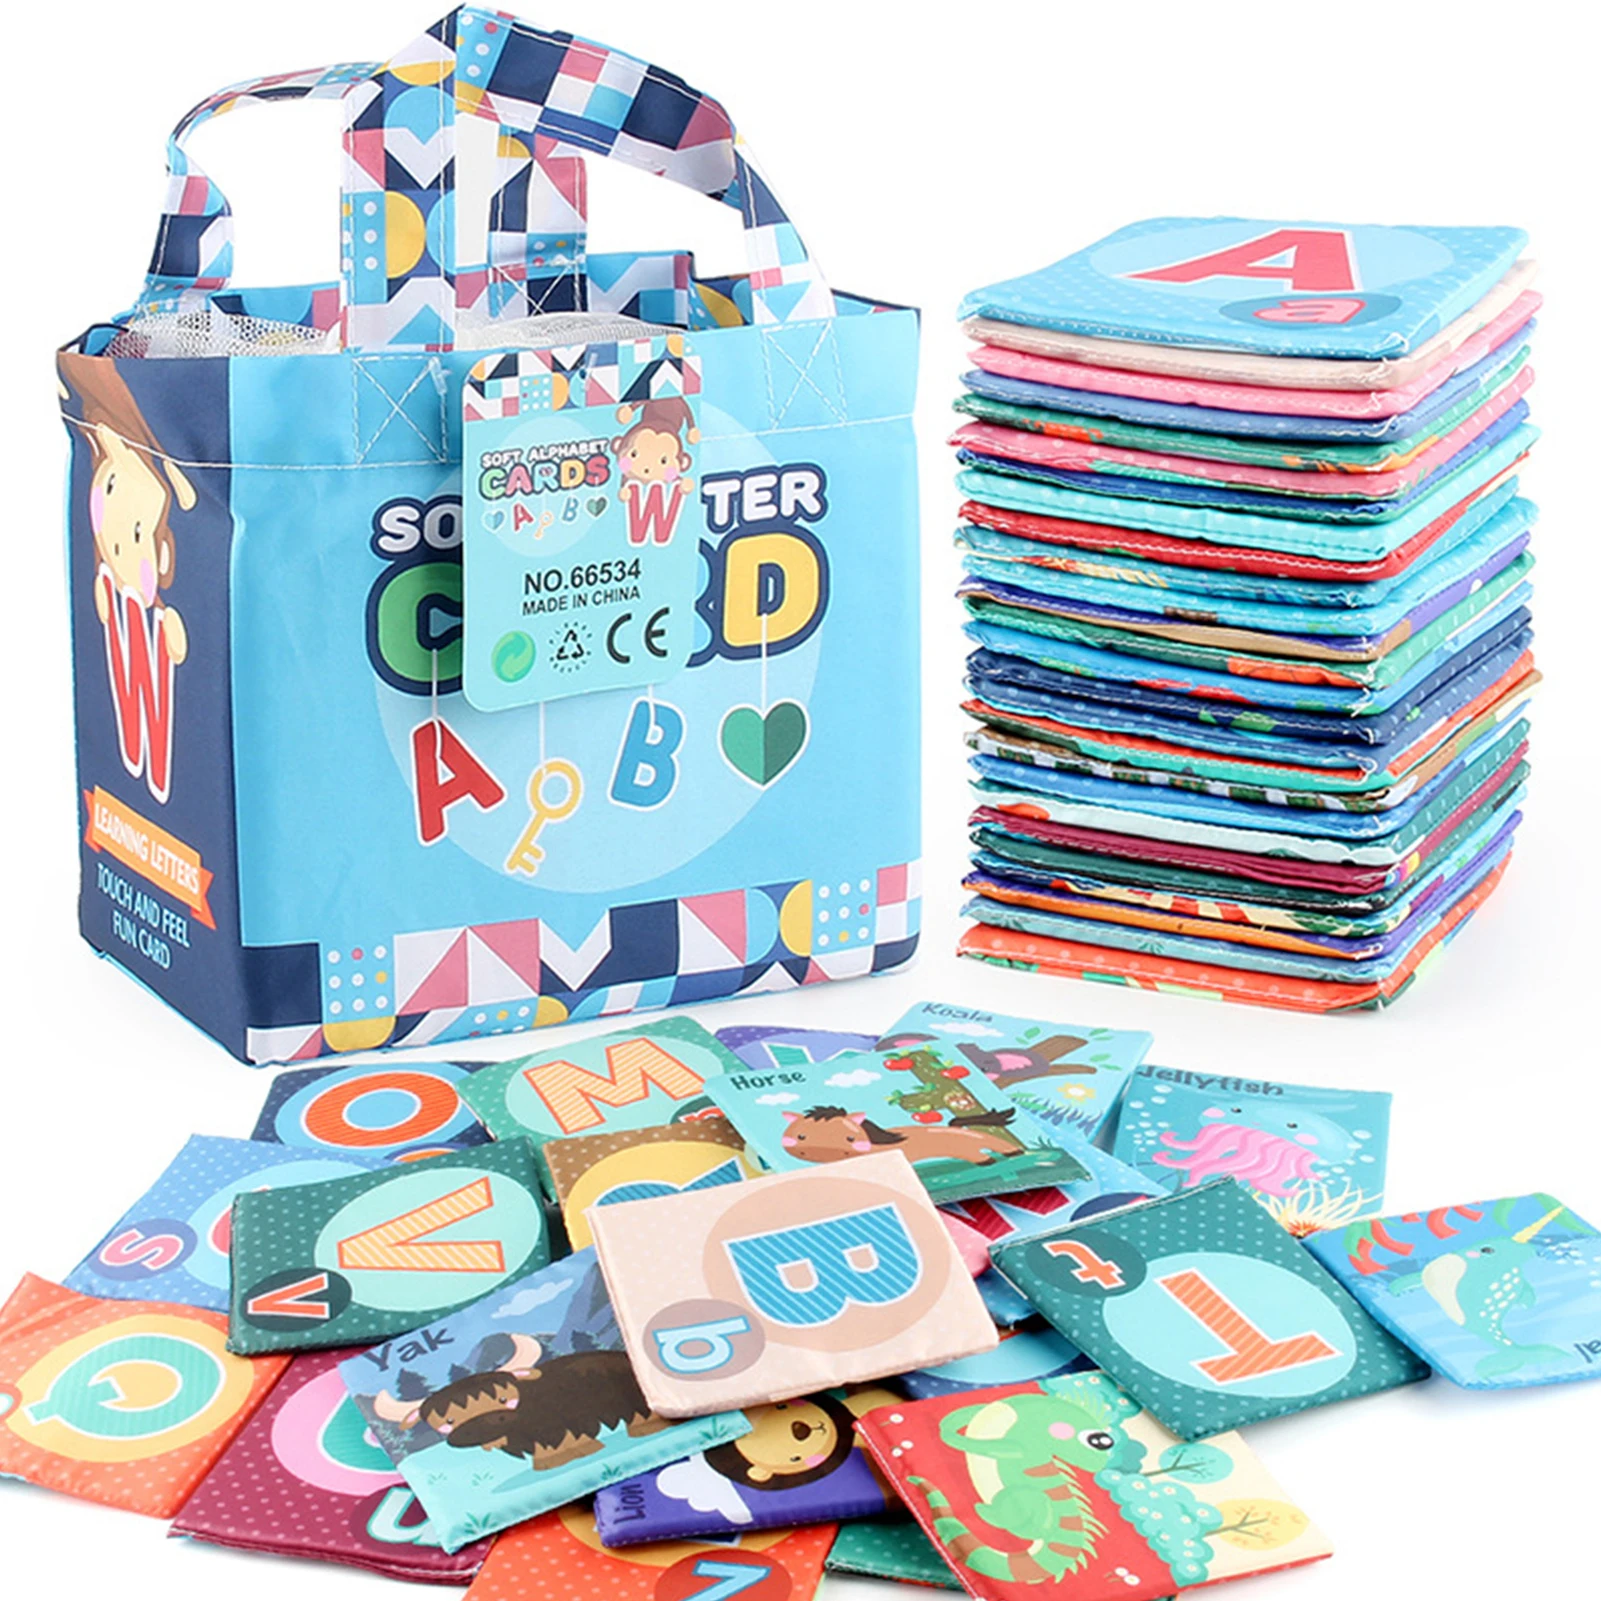 Child Soft Alphabet Cards Toys Soft Alphabet Cards With Cloth Storage Bag For Babies Infants Toddlers And Kids ABCs Learning